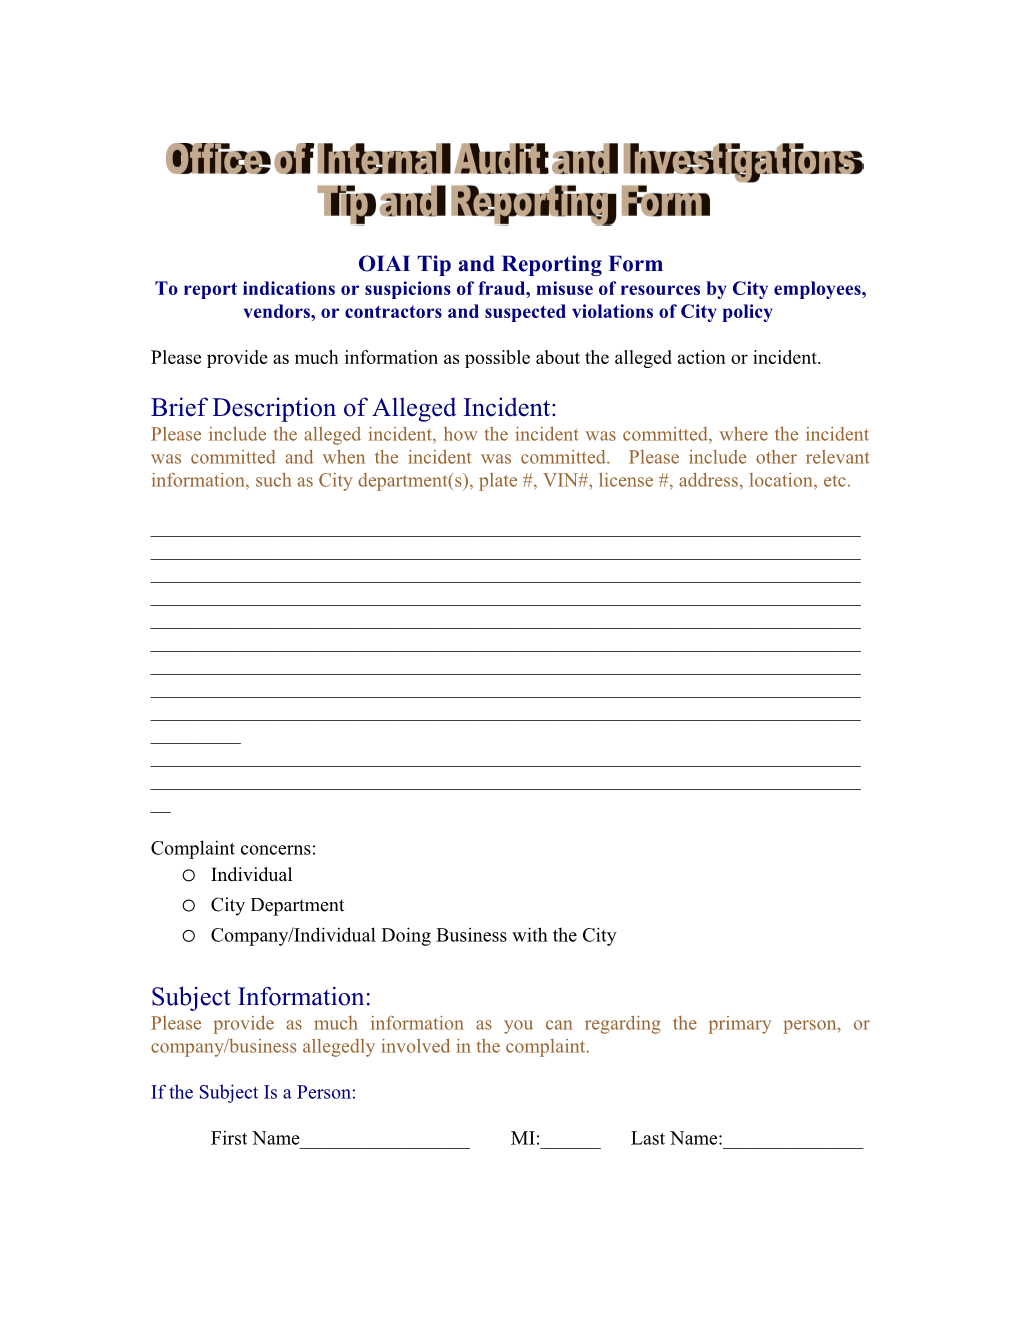 Tip and Reporting Form